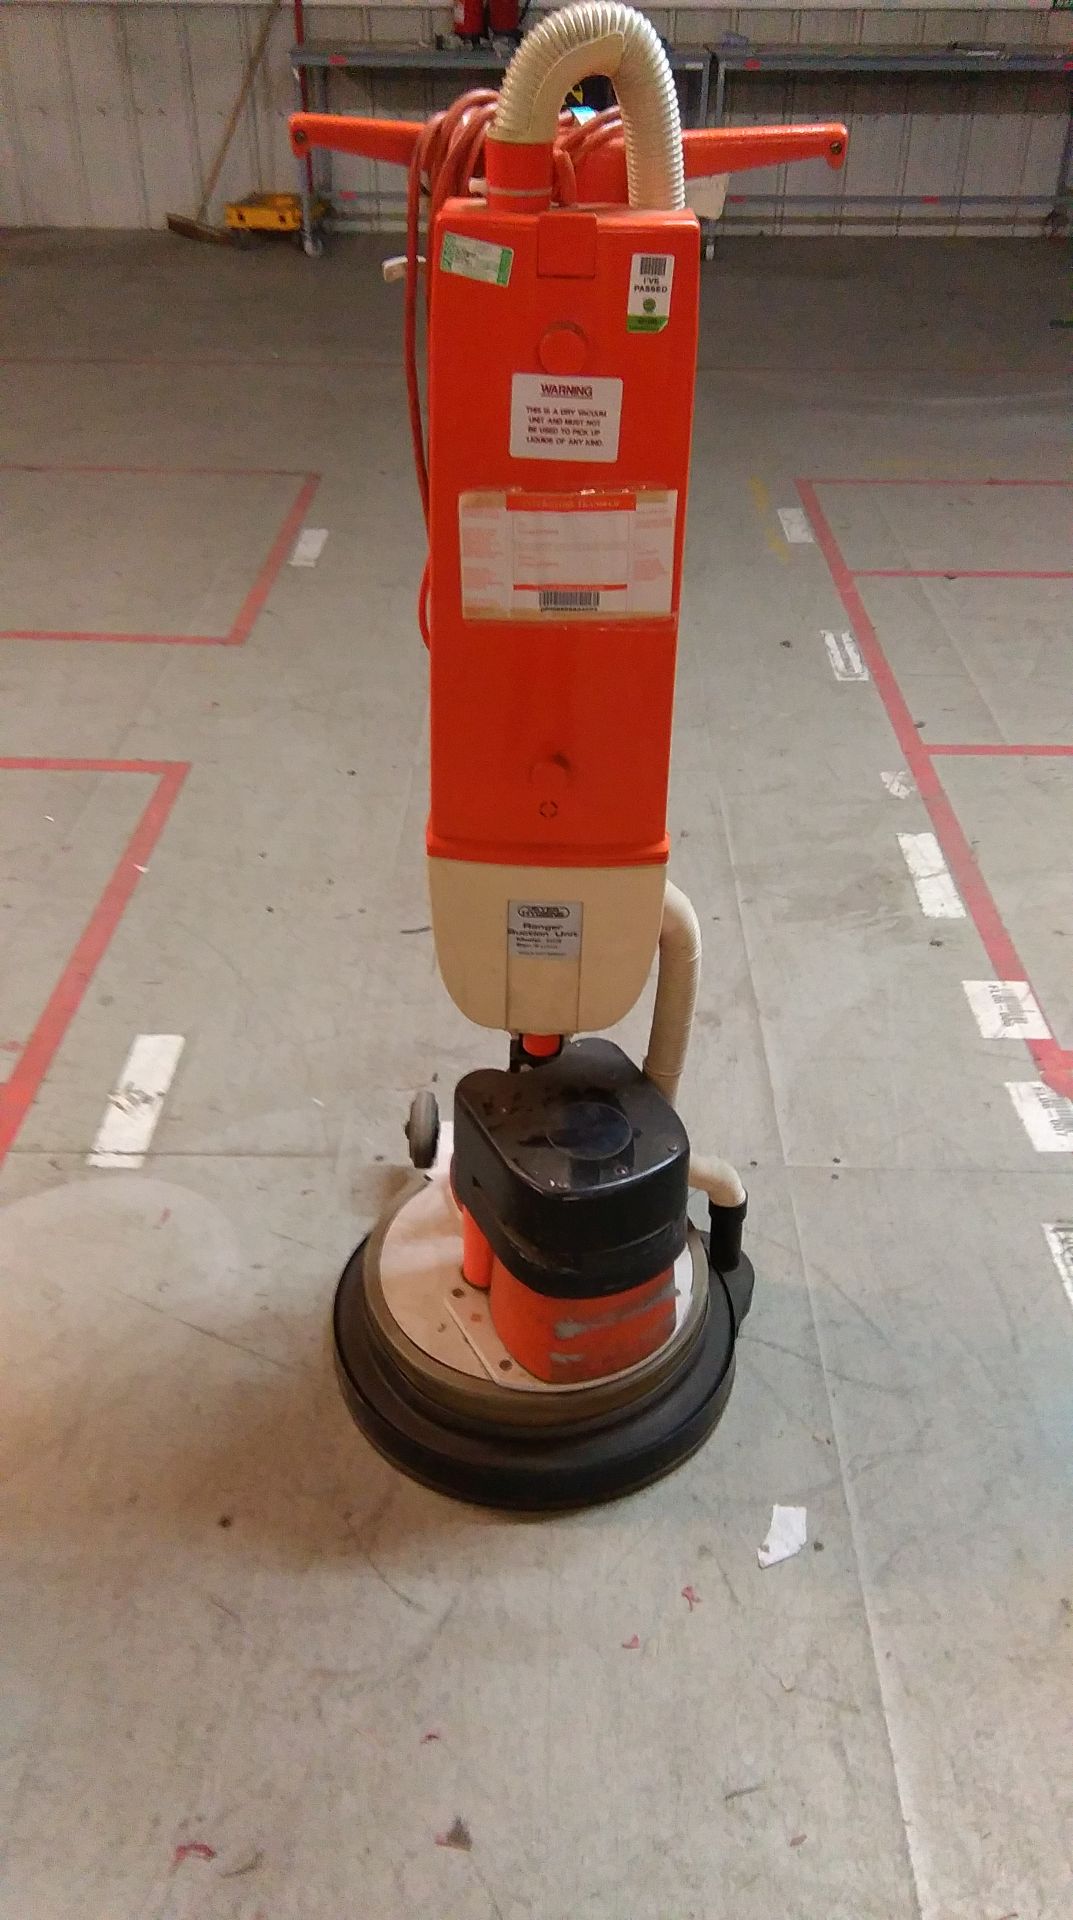 Jeyes Hygiene Rotary Floor Cleaning Machine for Hard Floors & Carpet Care